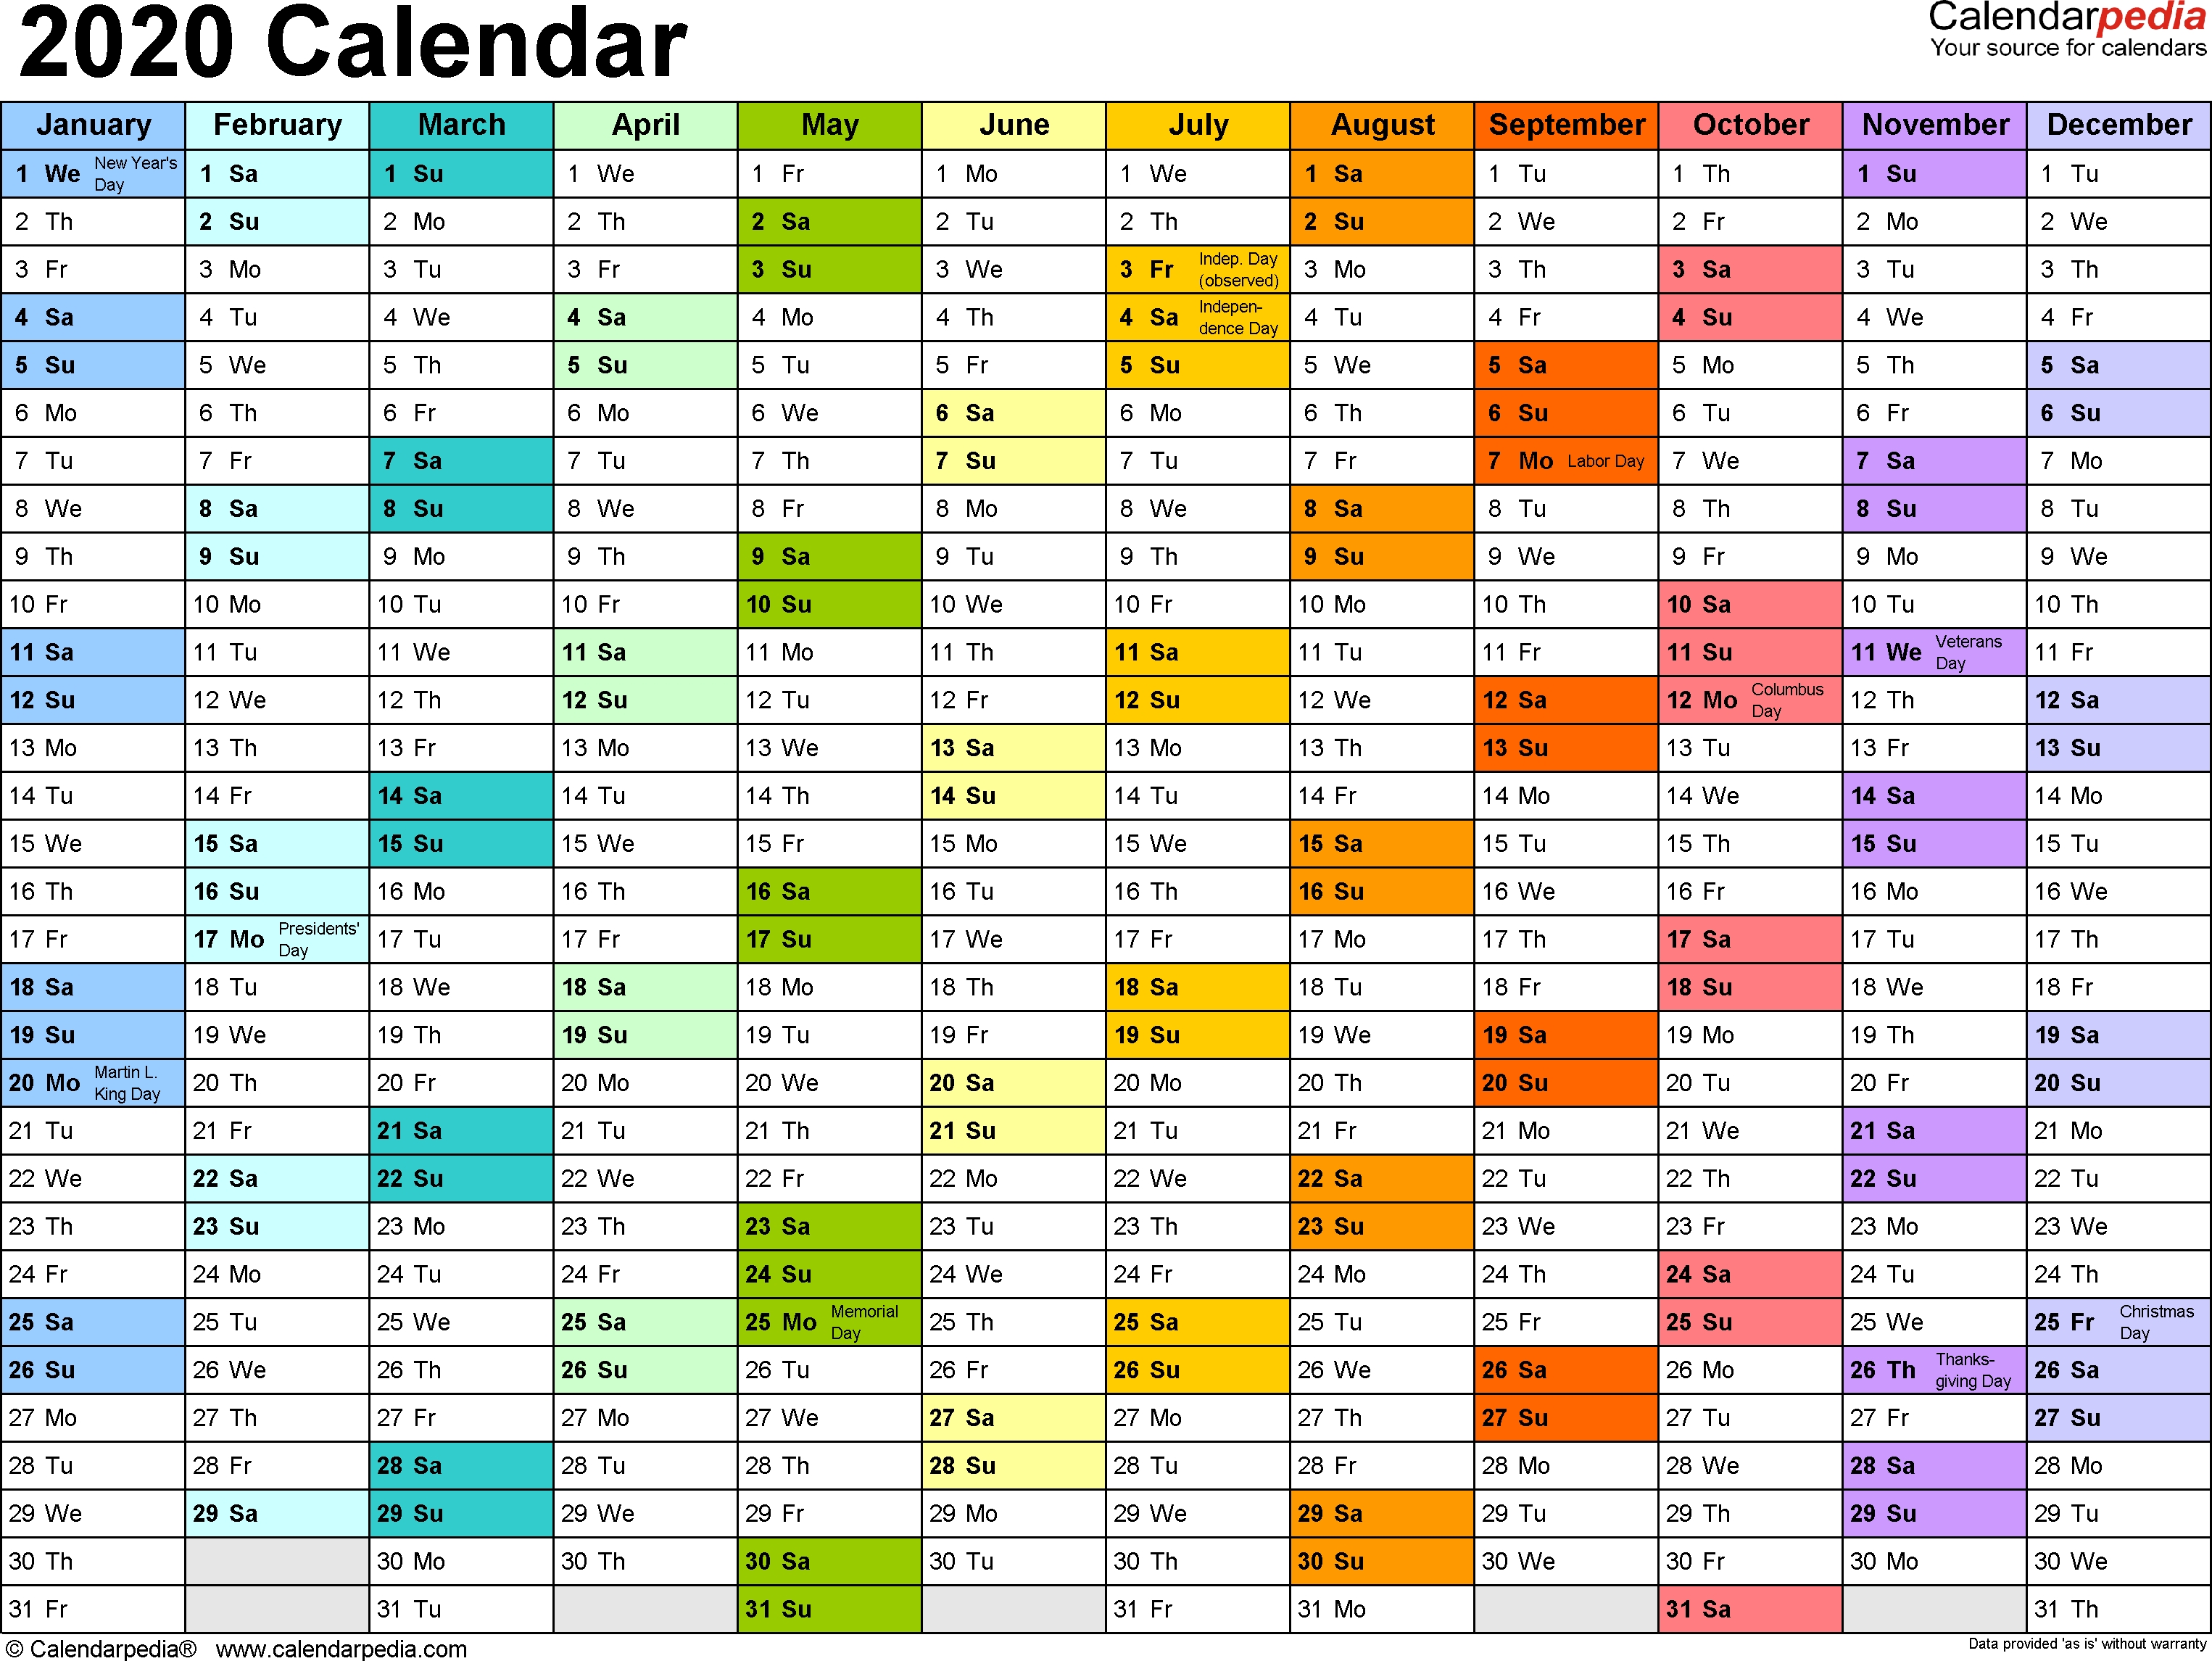 2020 Calendar - Download 18 Free Printable Excel Templates-2020 Calendar South Africa With Public Holidays And School Terms